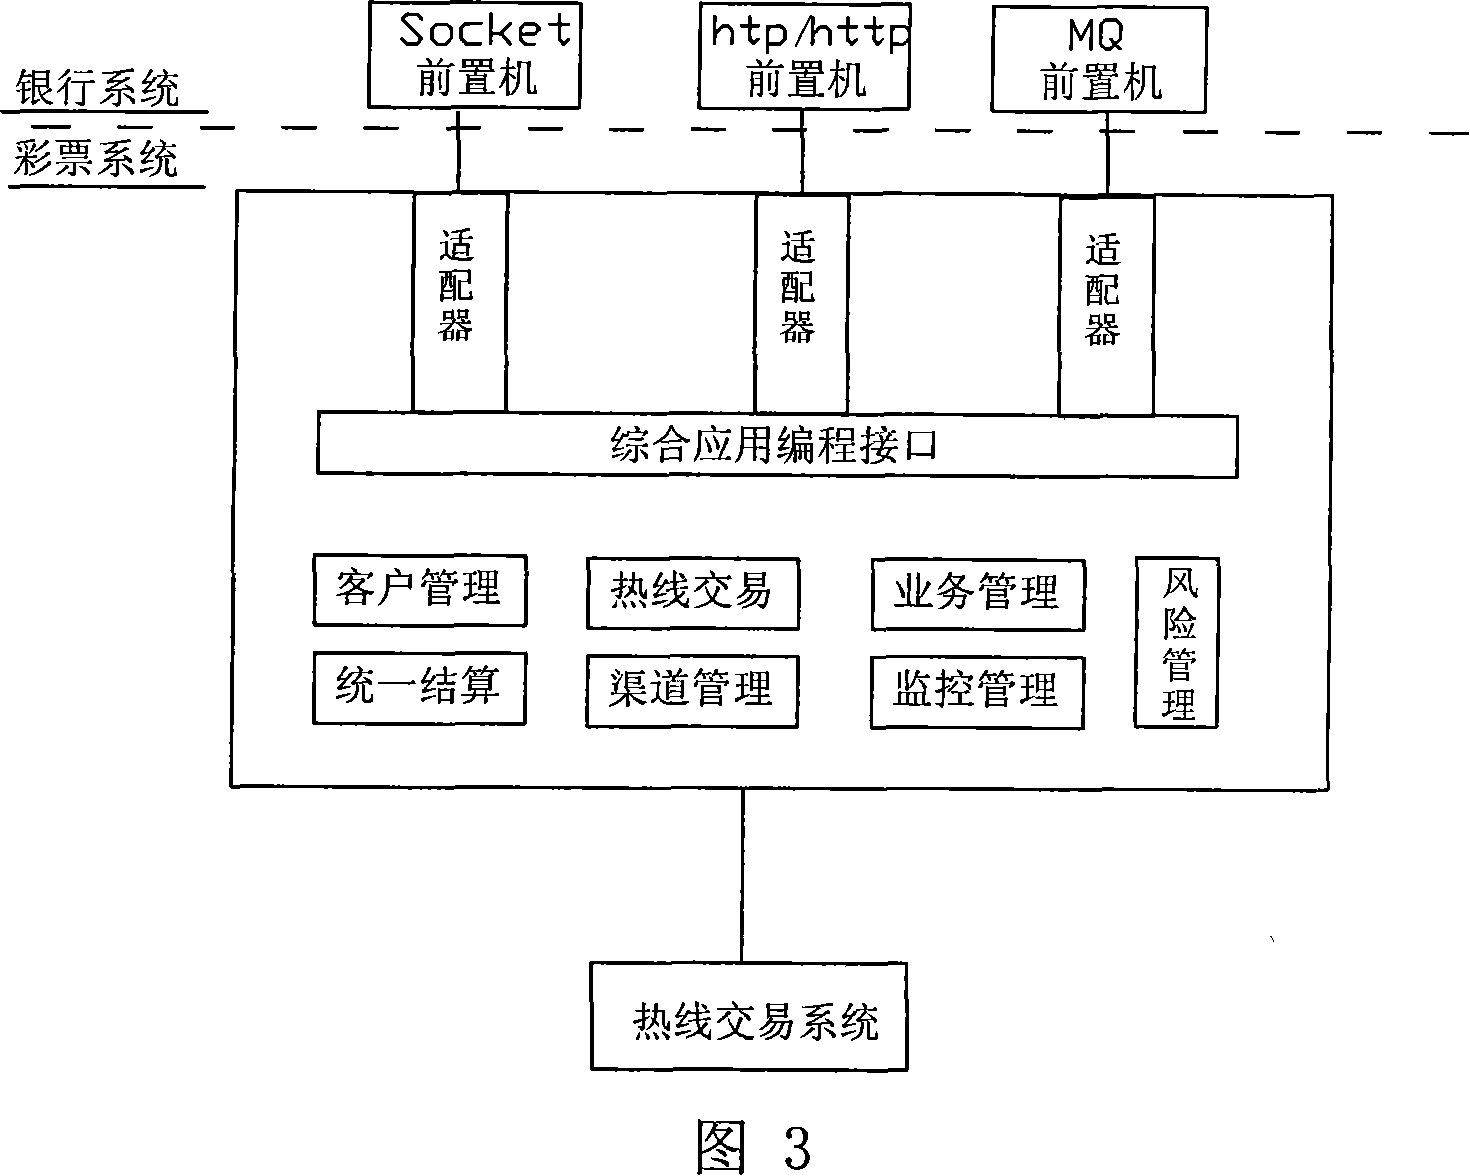 Bank self-help lottery ticket distribution system and its method